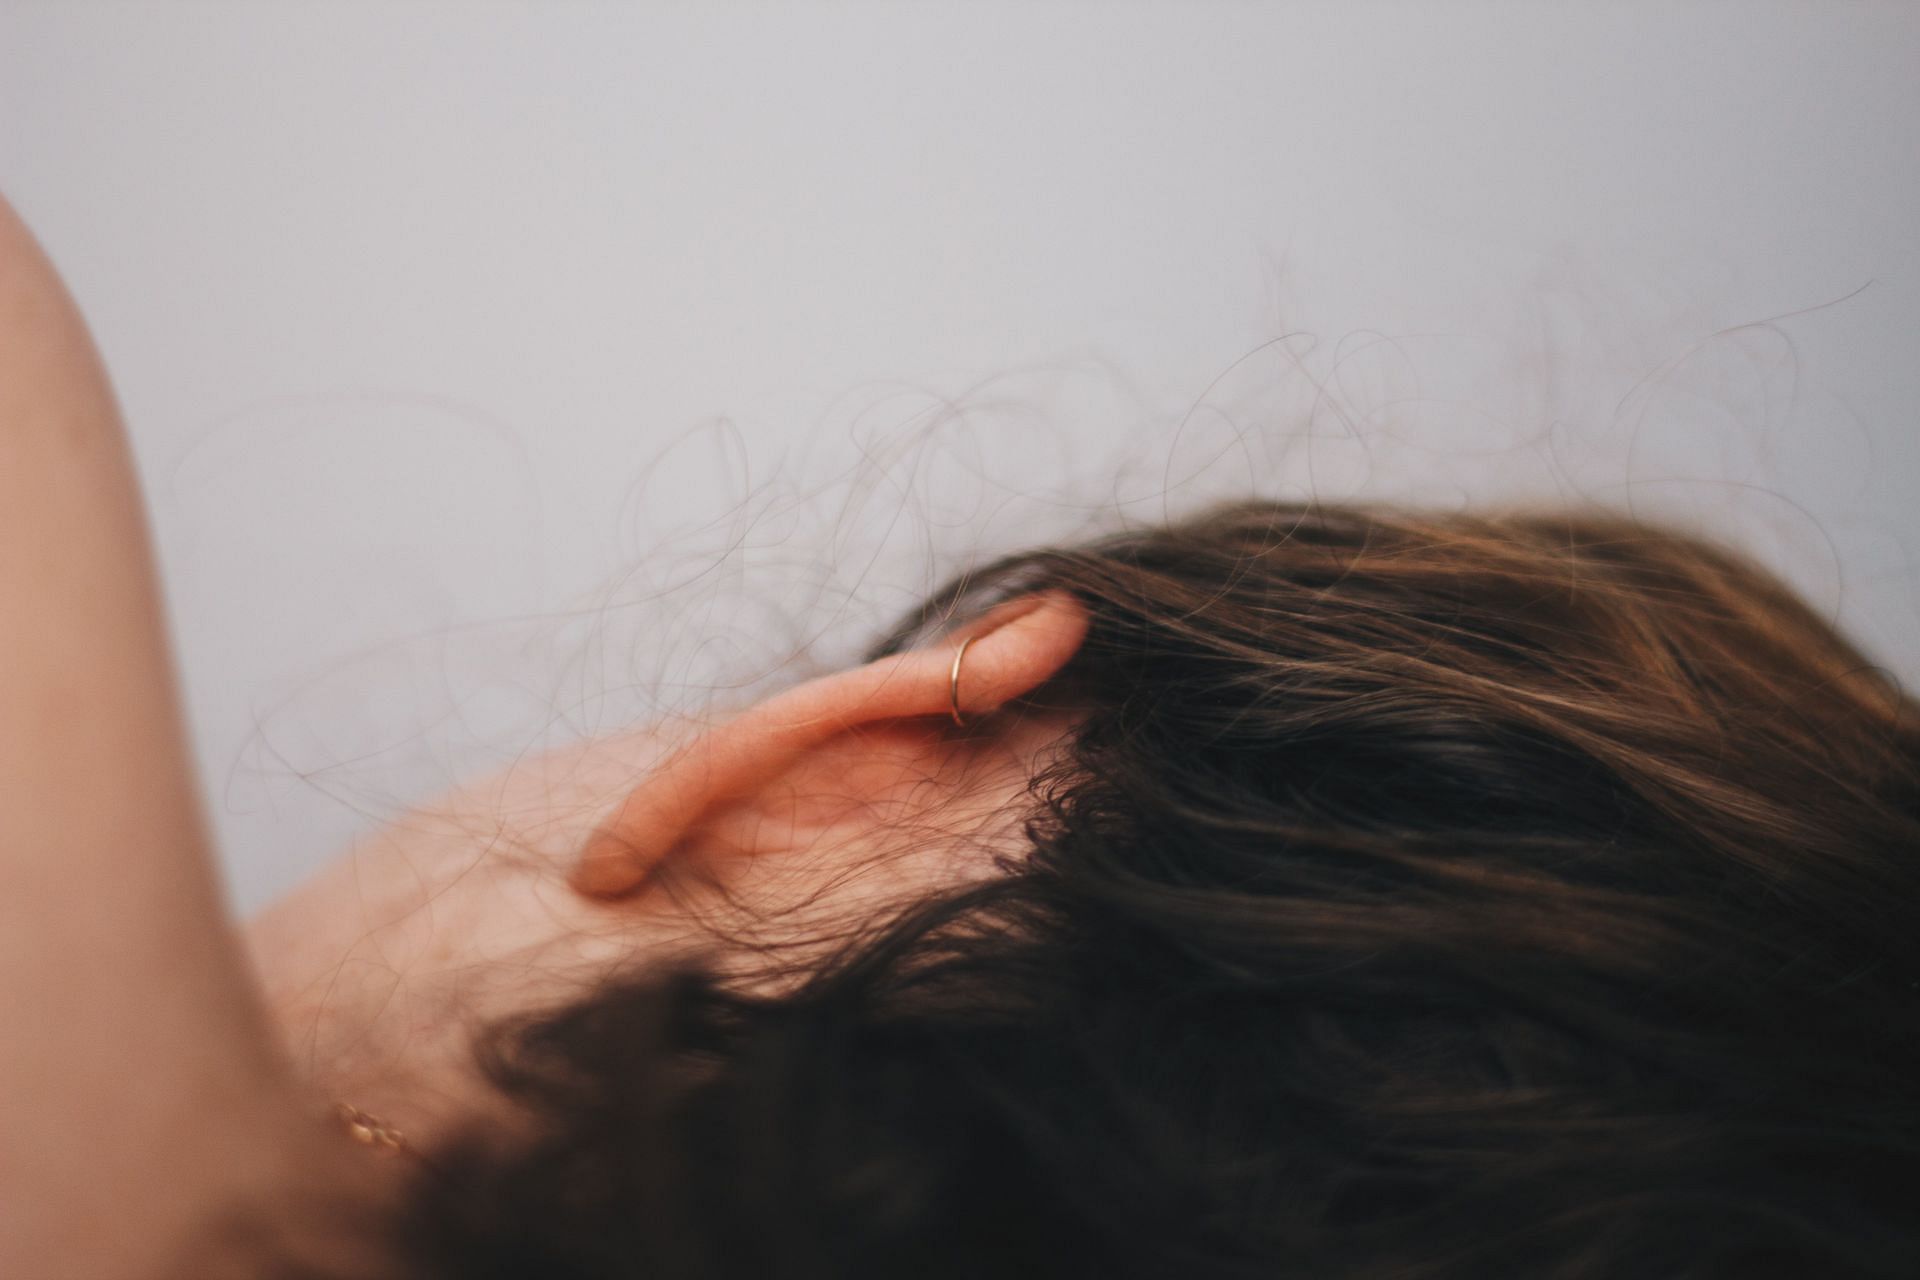 Keeping your head elevated all time can relieve ear congestion. (Image via Unsplash/Hayes Potter)